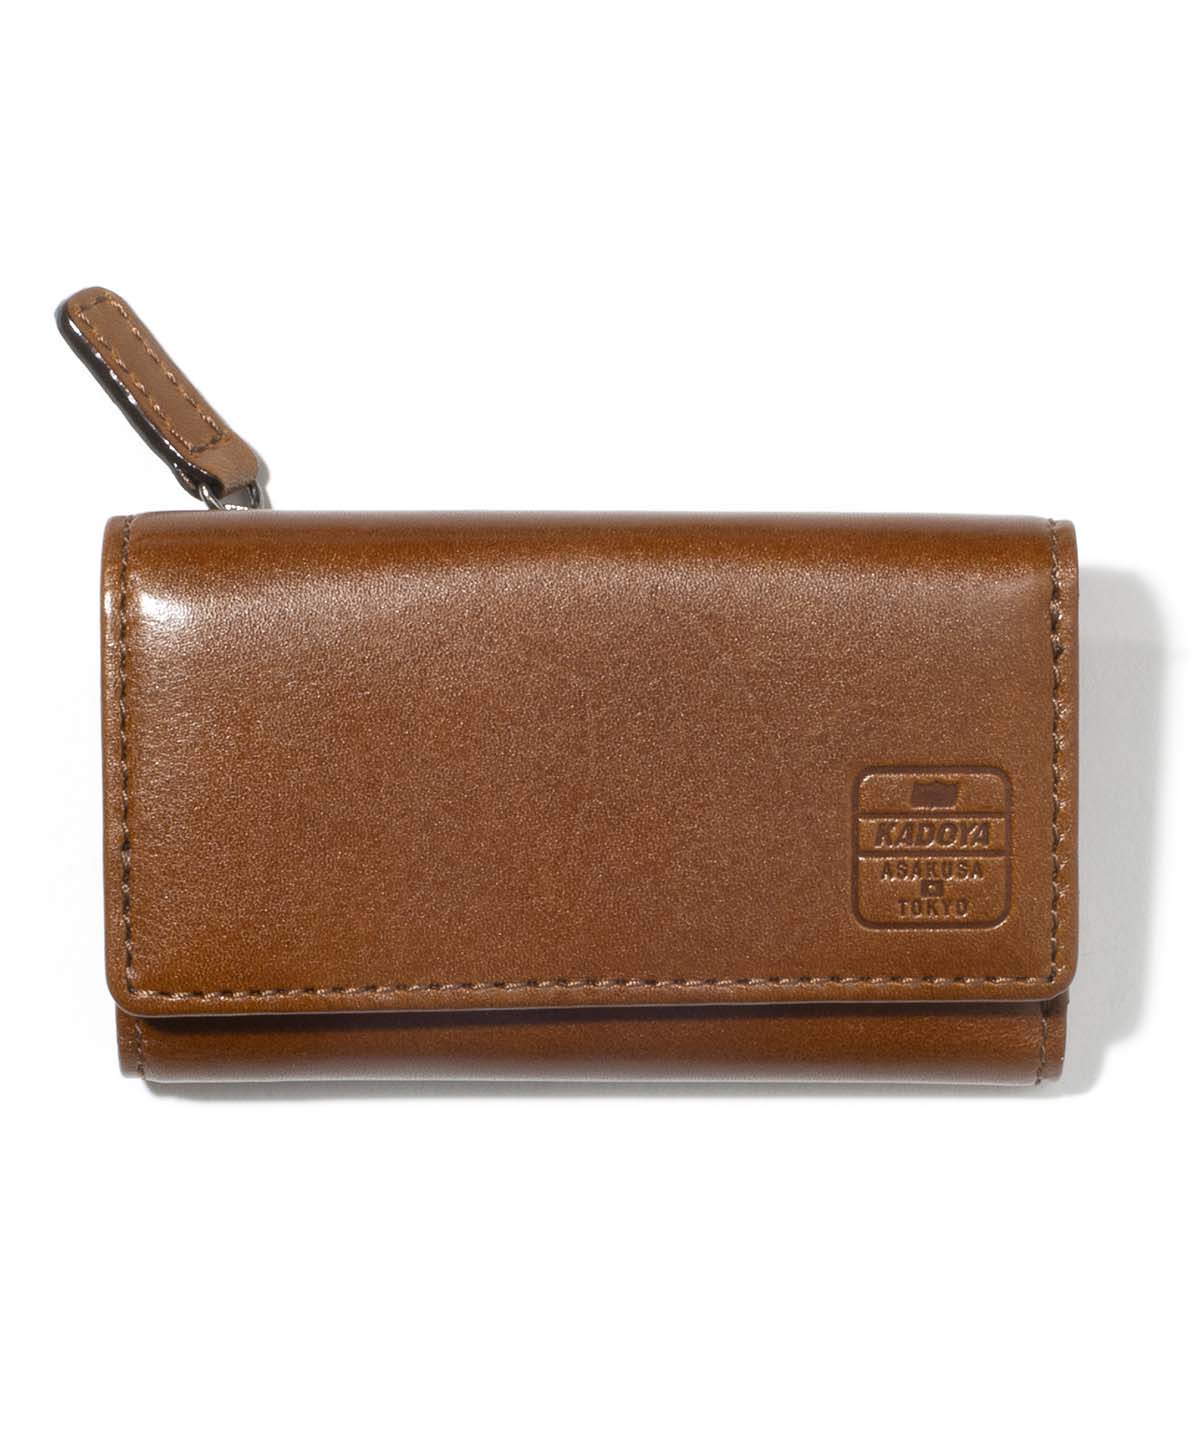 KEY CASE COMPACT WALLET / Brown